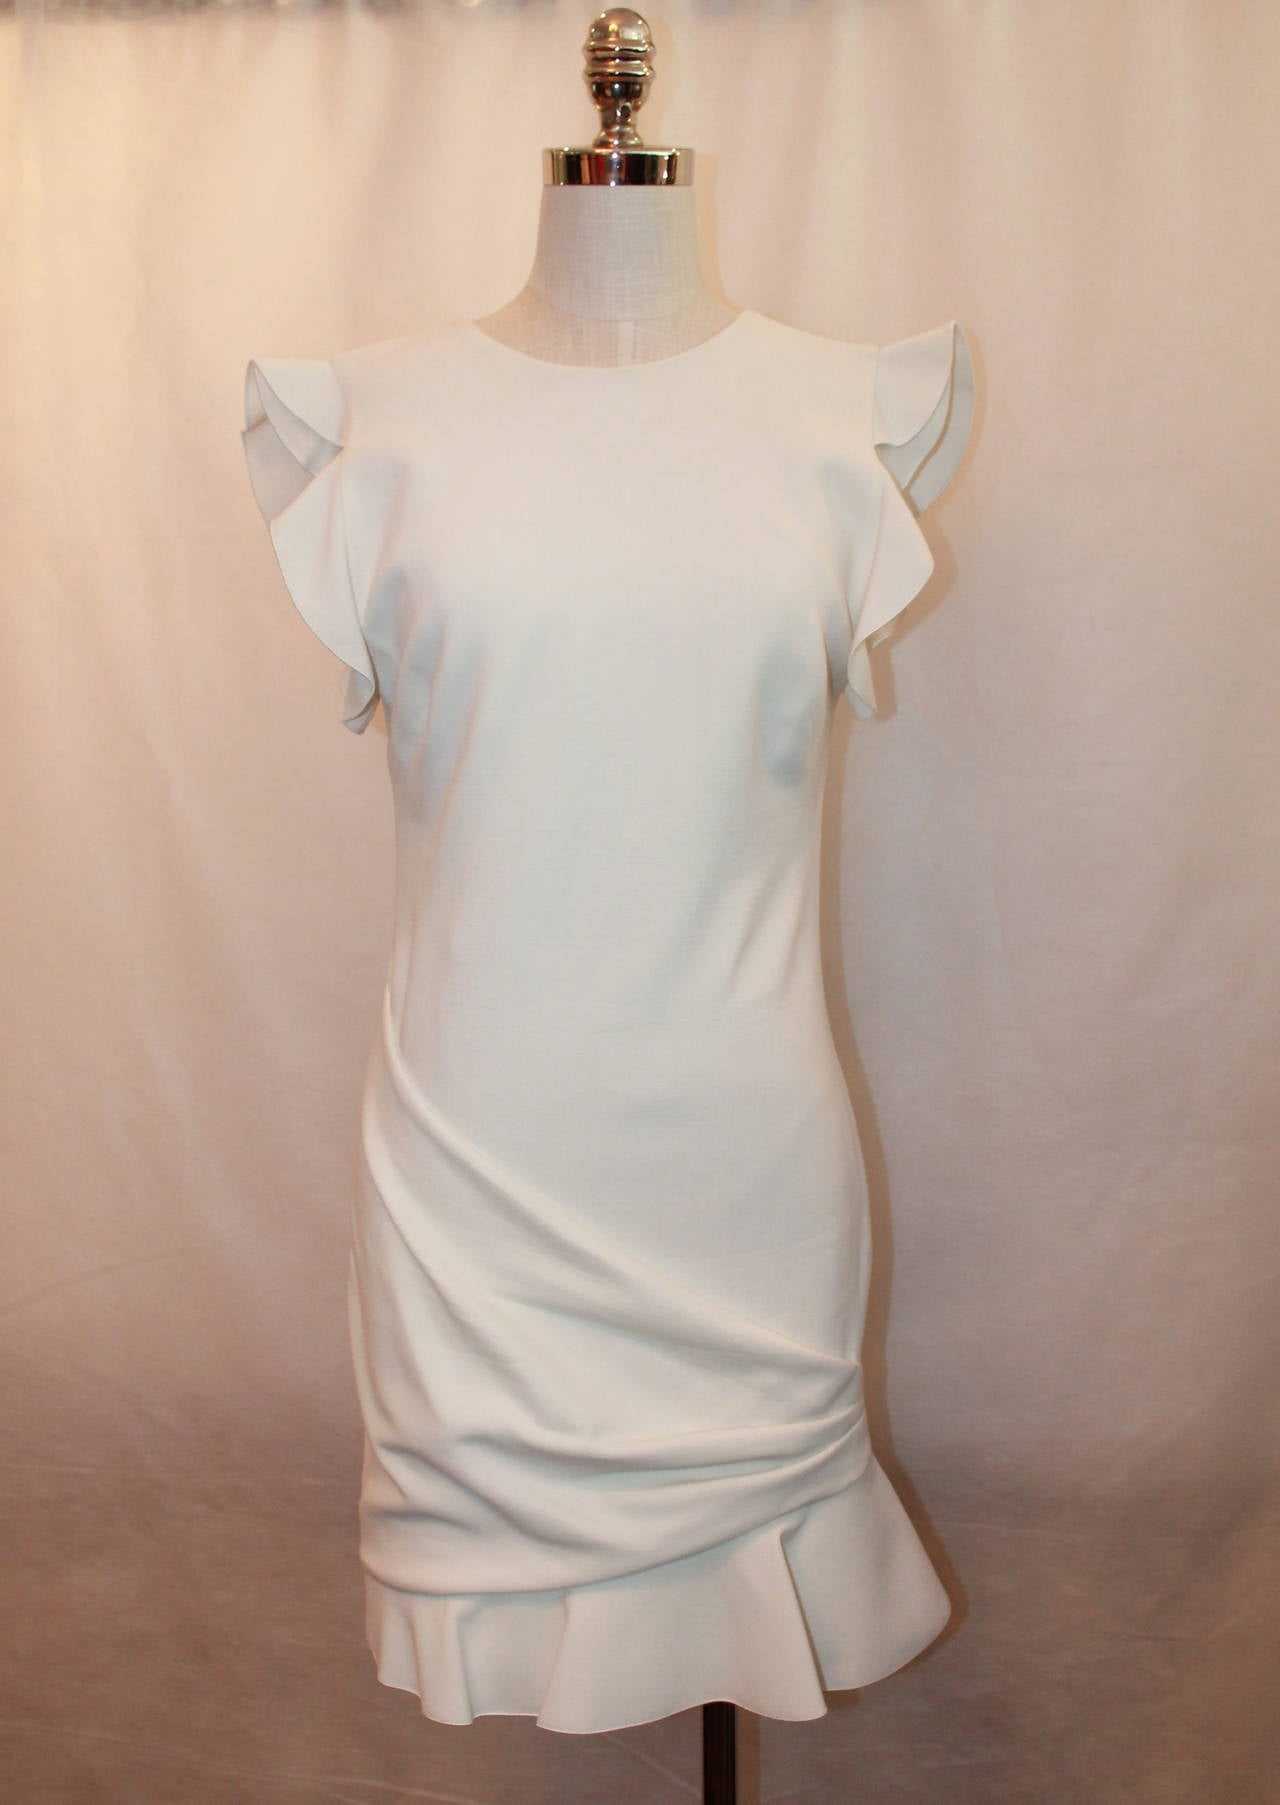 NEW Emilio Pucci Ivory Wool Blend Short Dress - 10. This dress is in excellent condition and has the original tag on it. The sleeves are a ruffle and the bottom has a gathering with large ruffle. 

Measurements:
Bust- 36